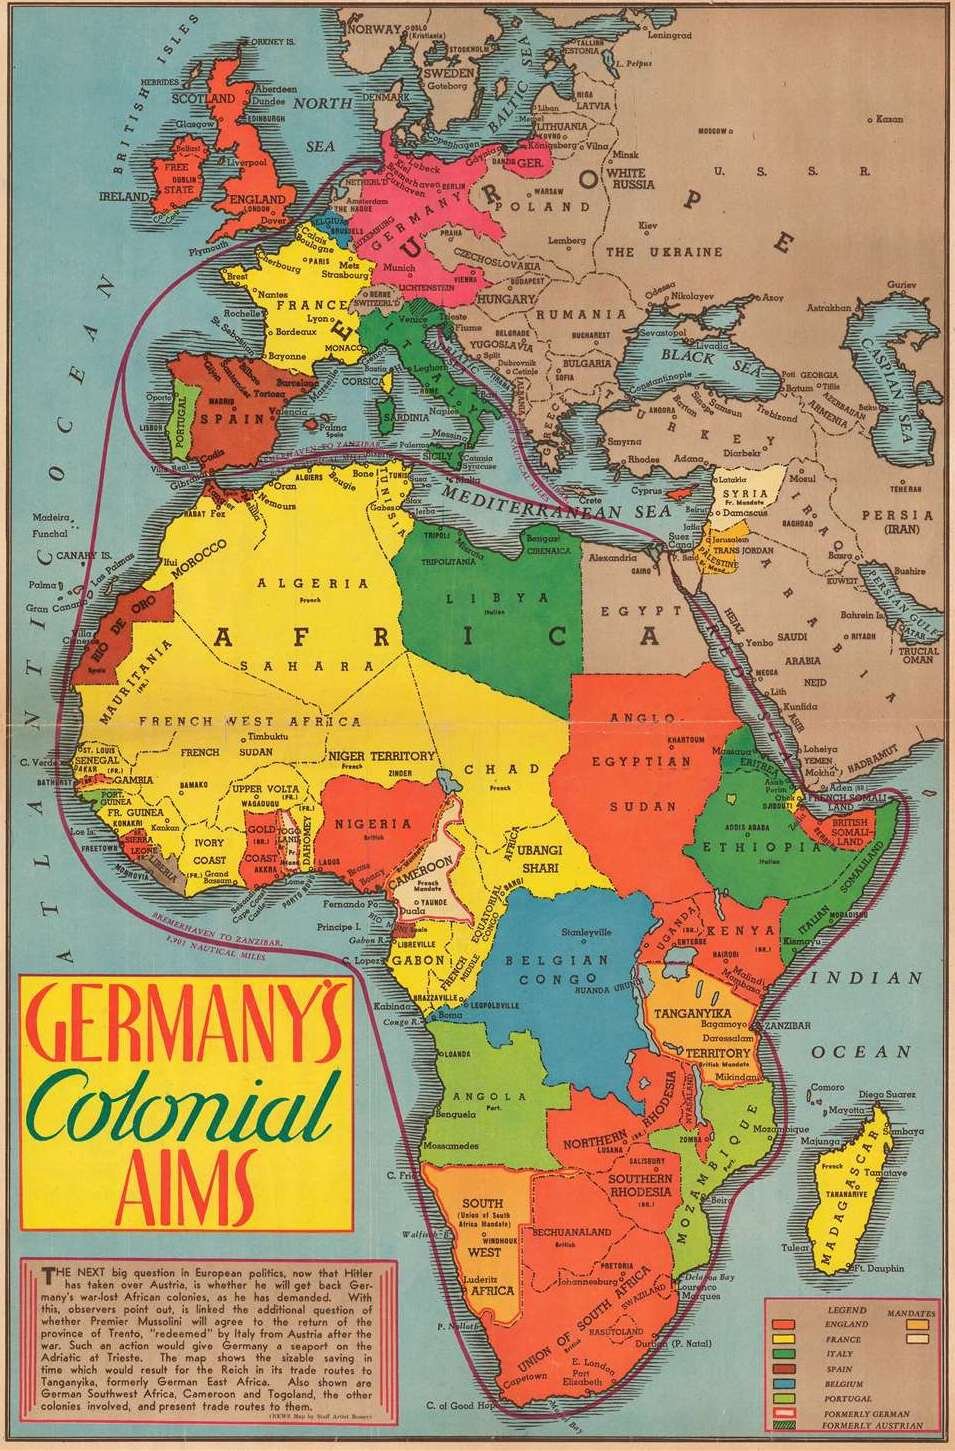 Examining Nazi plans for dividing and 'improving' Africa during World War II